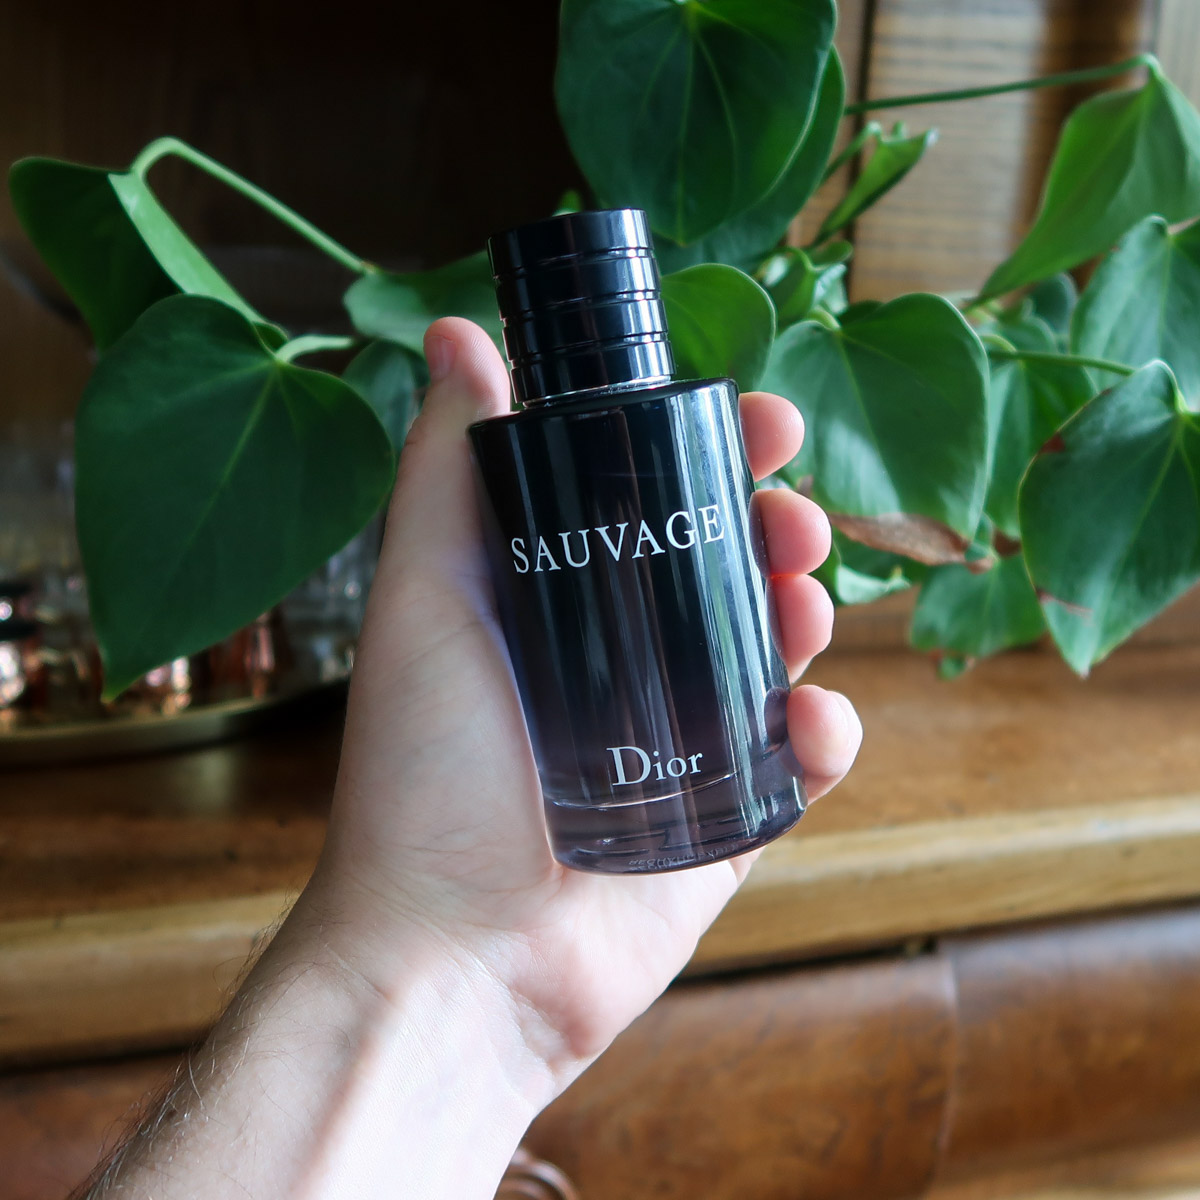 dior-sauvage-edt-review-man-for-himself